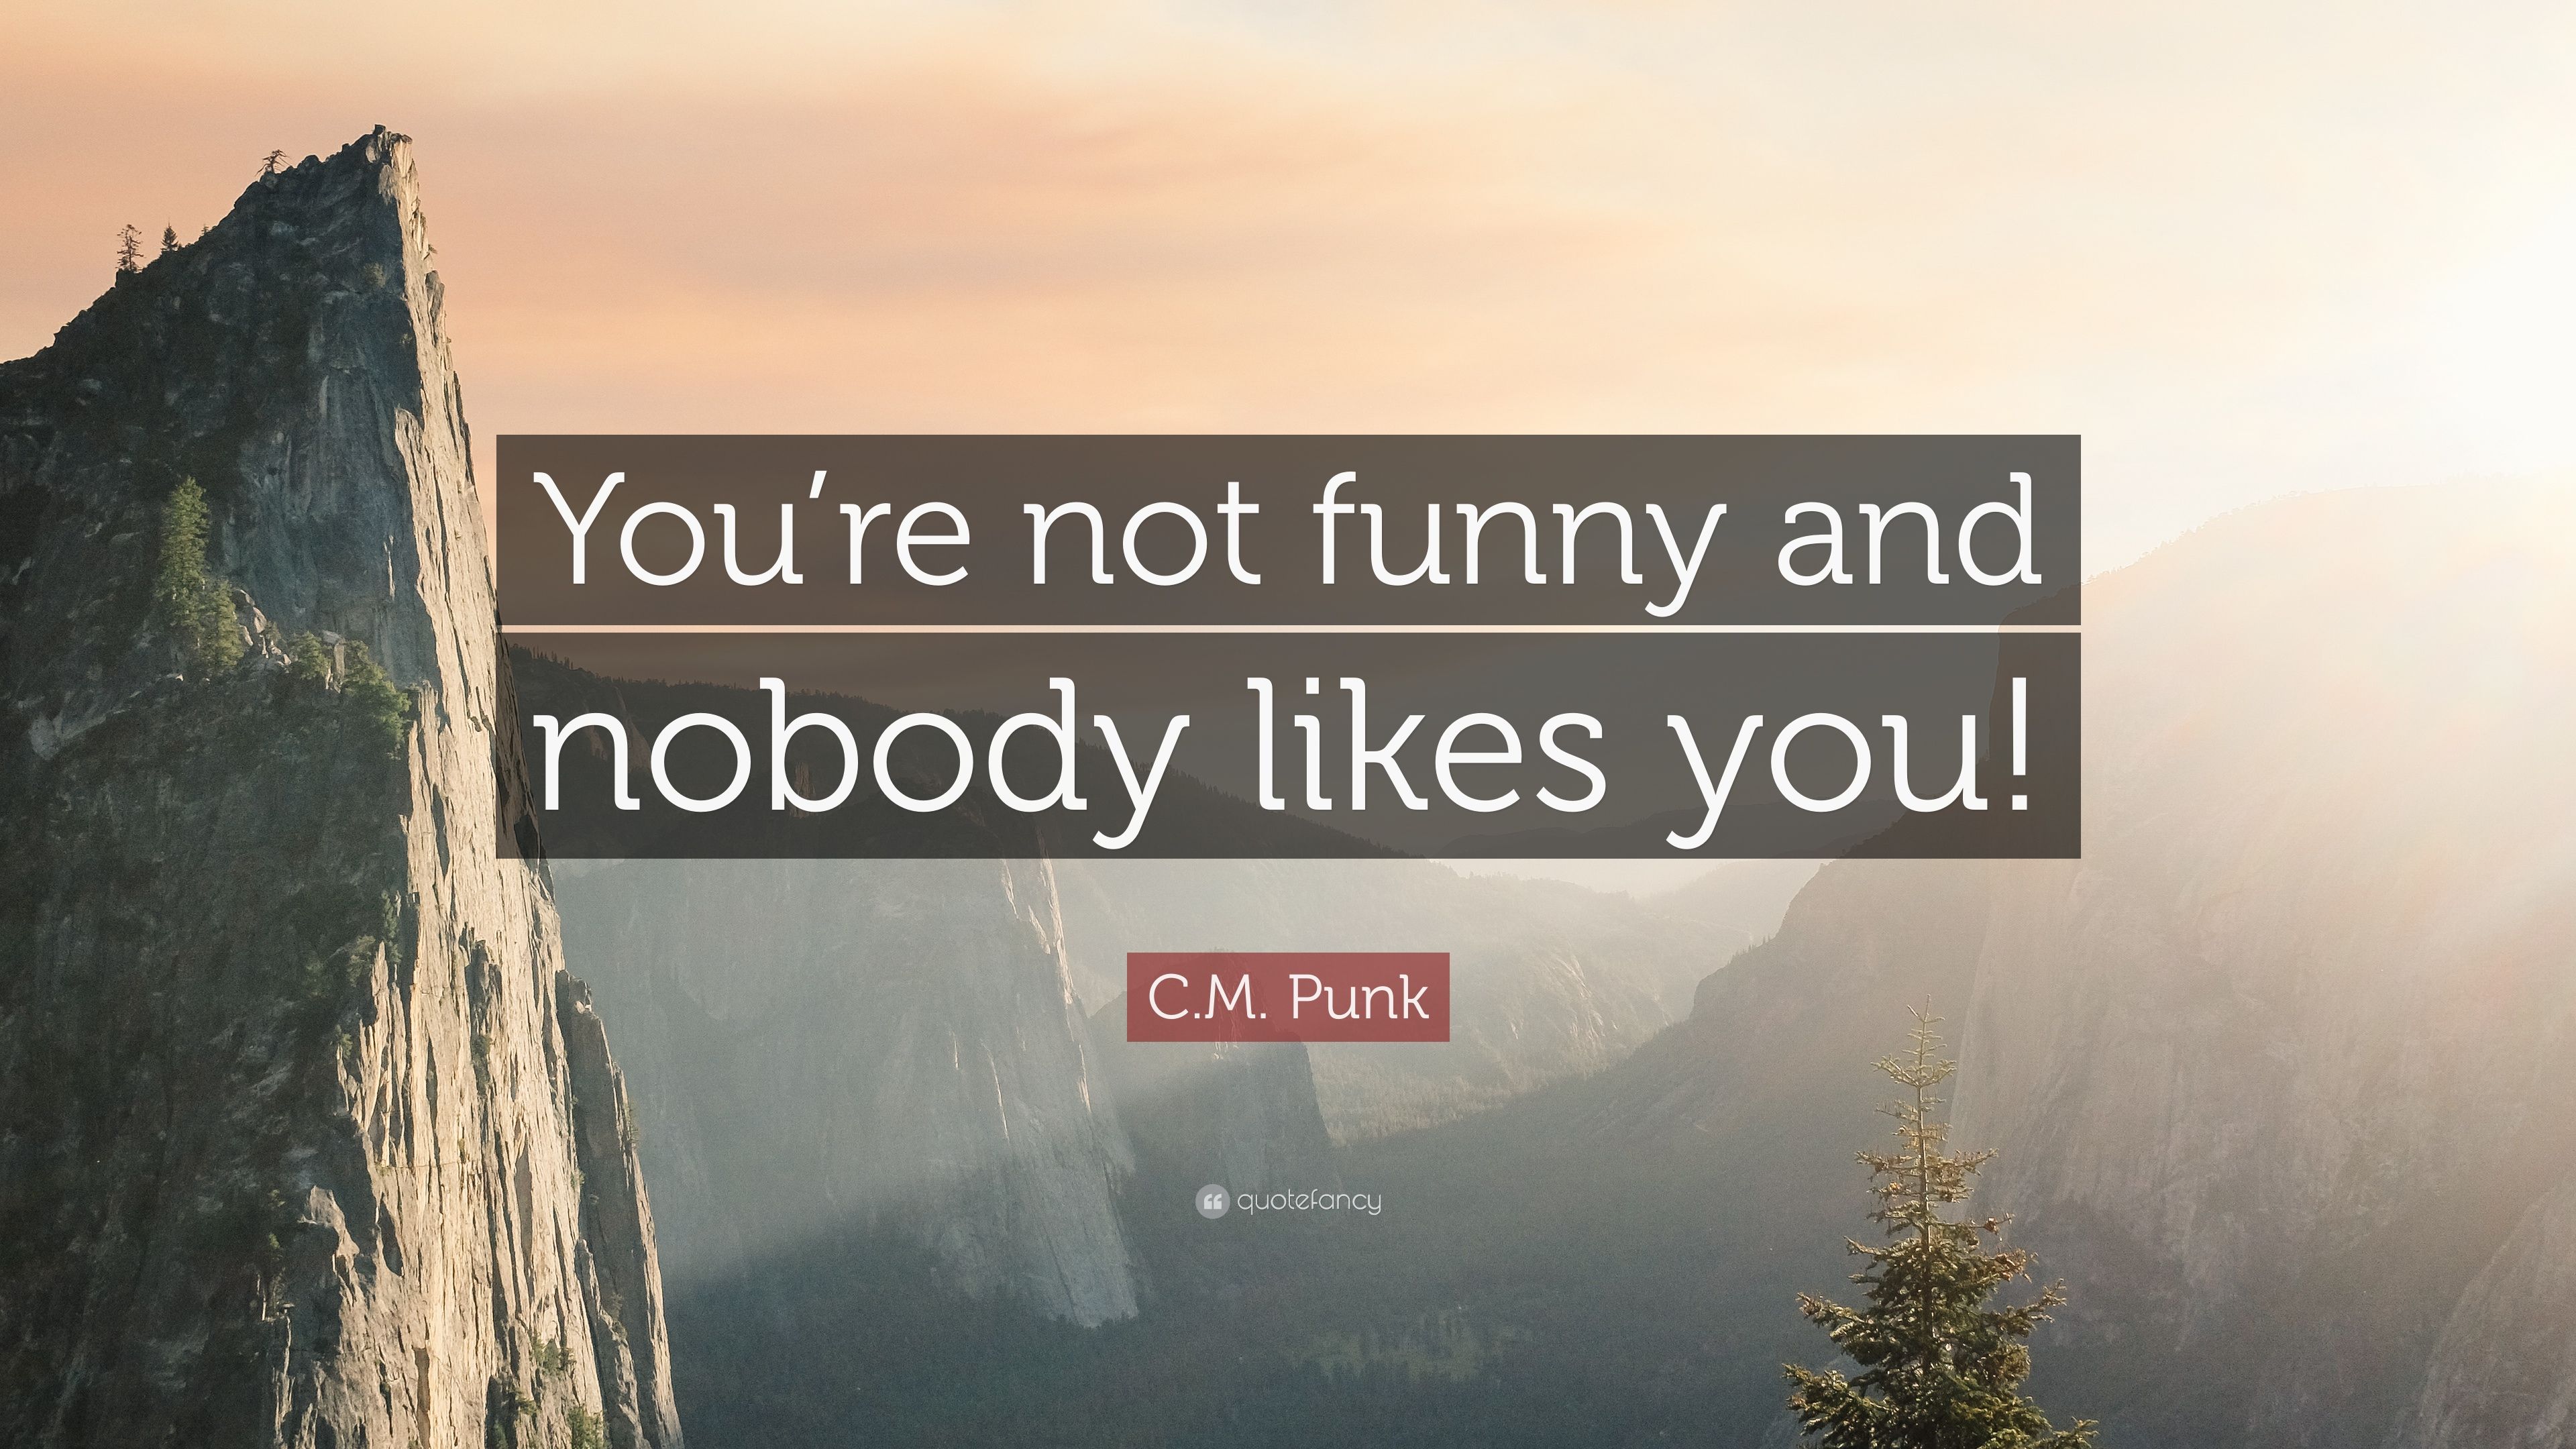 C.M. Punk Quote: “You're not funny and nobody likes you!” (12 wallpaper)